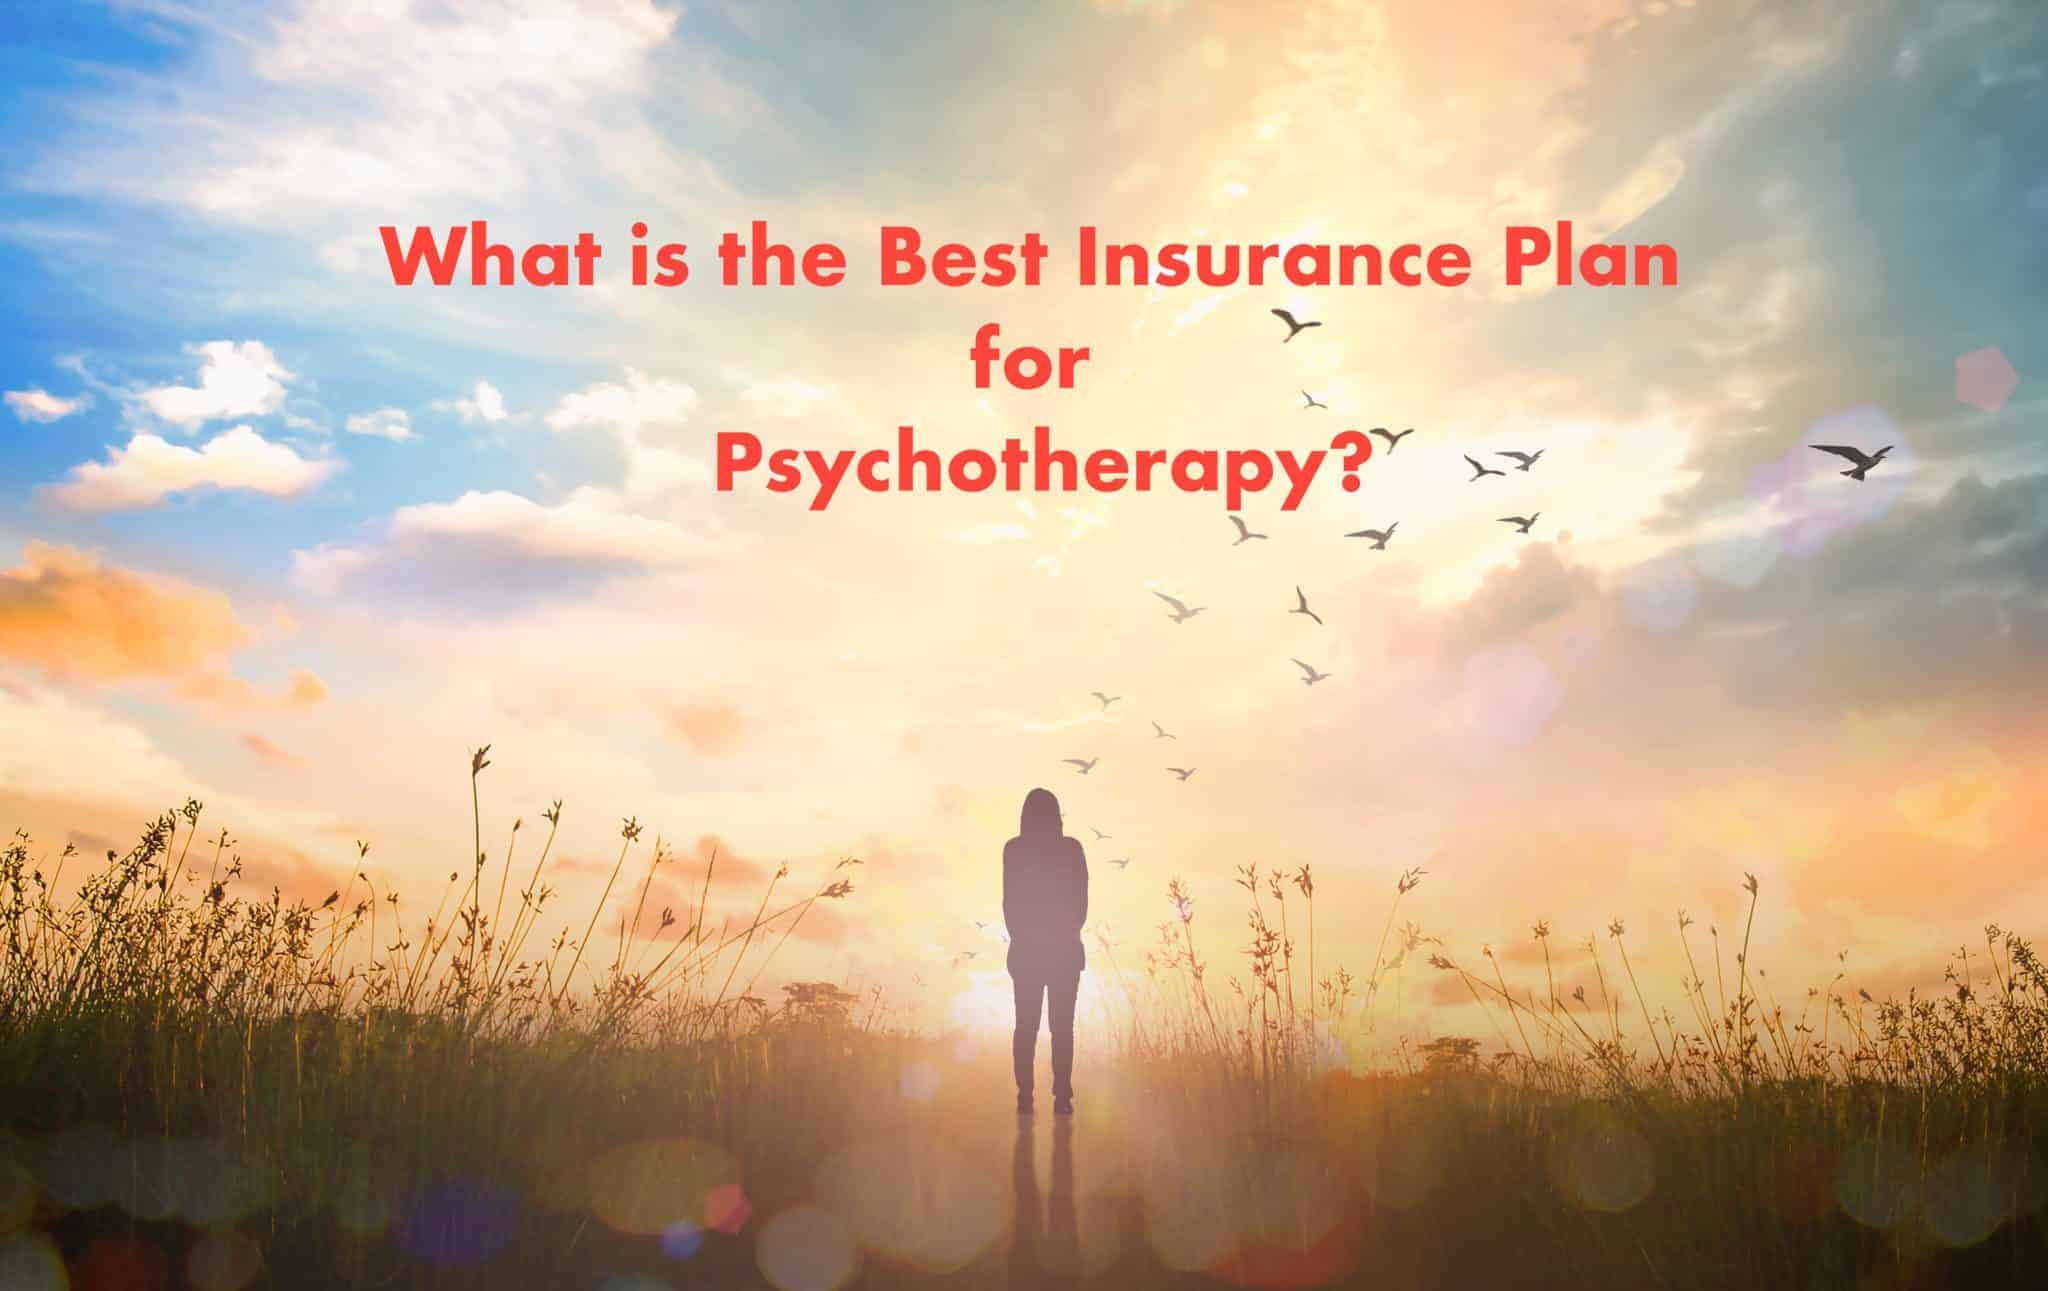 Featured image for “What is the Best Insurance Plan for Psychotherapy?”